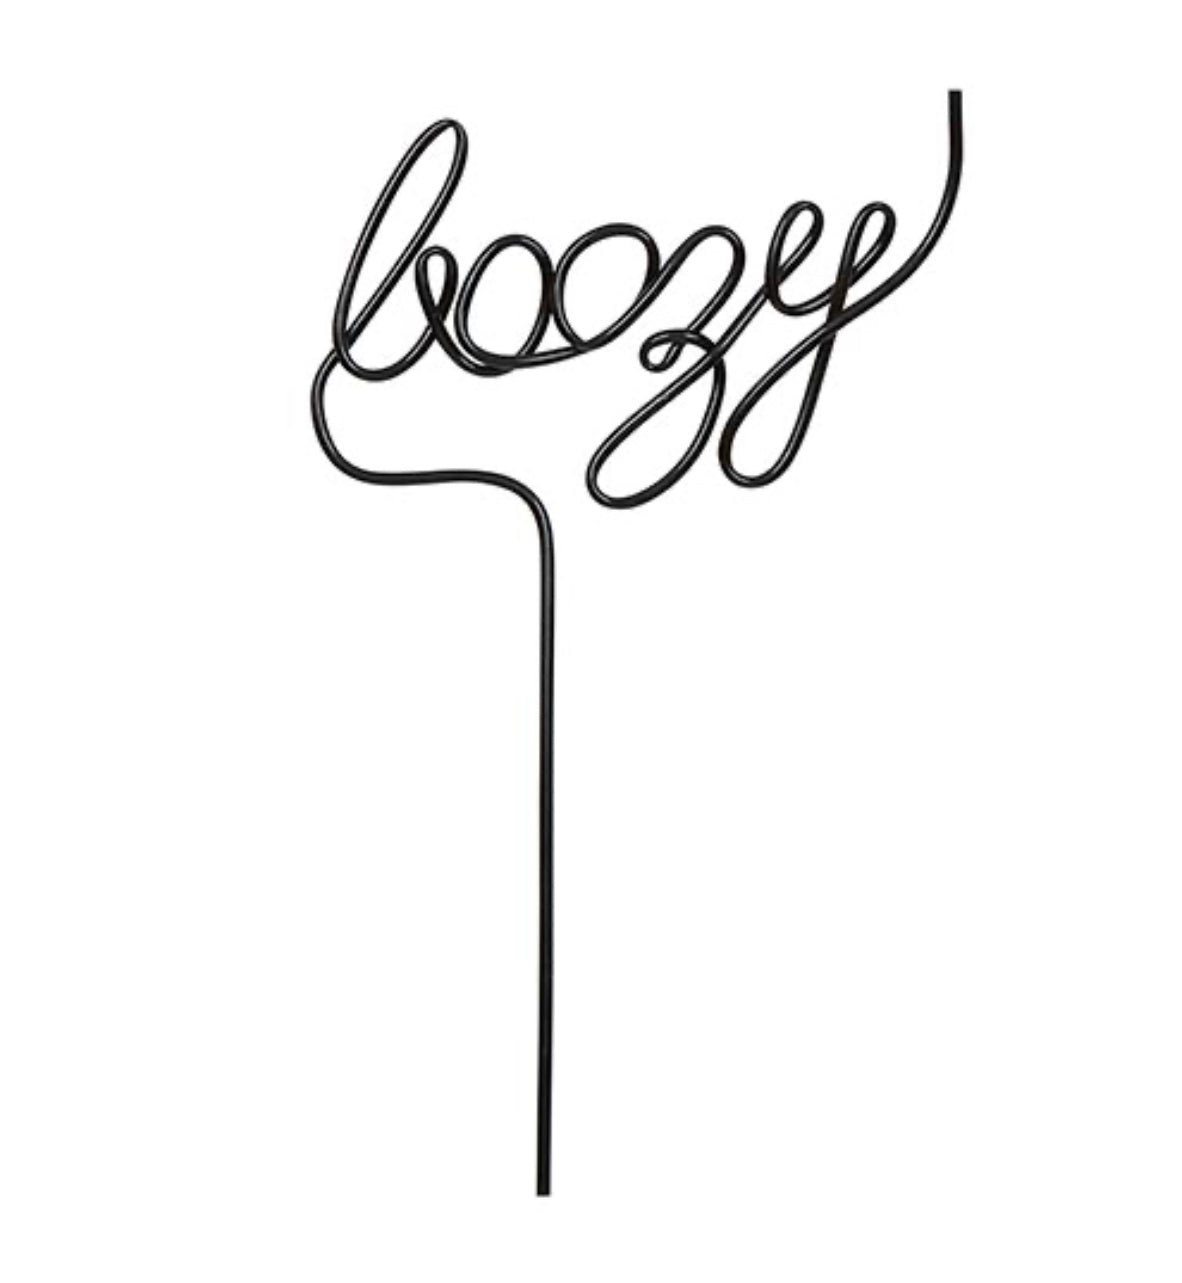 black plastic straw twisted into the word "boozy" at the top